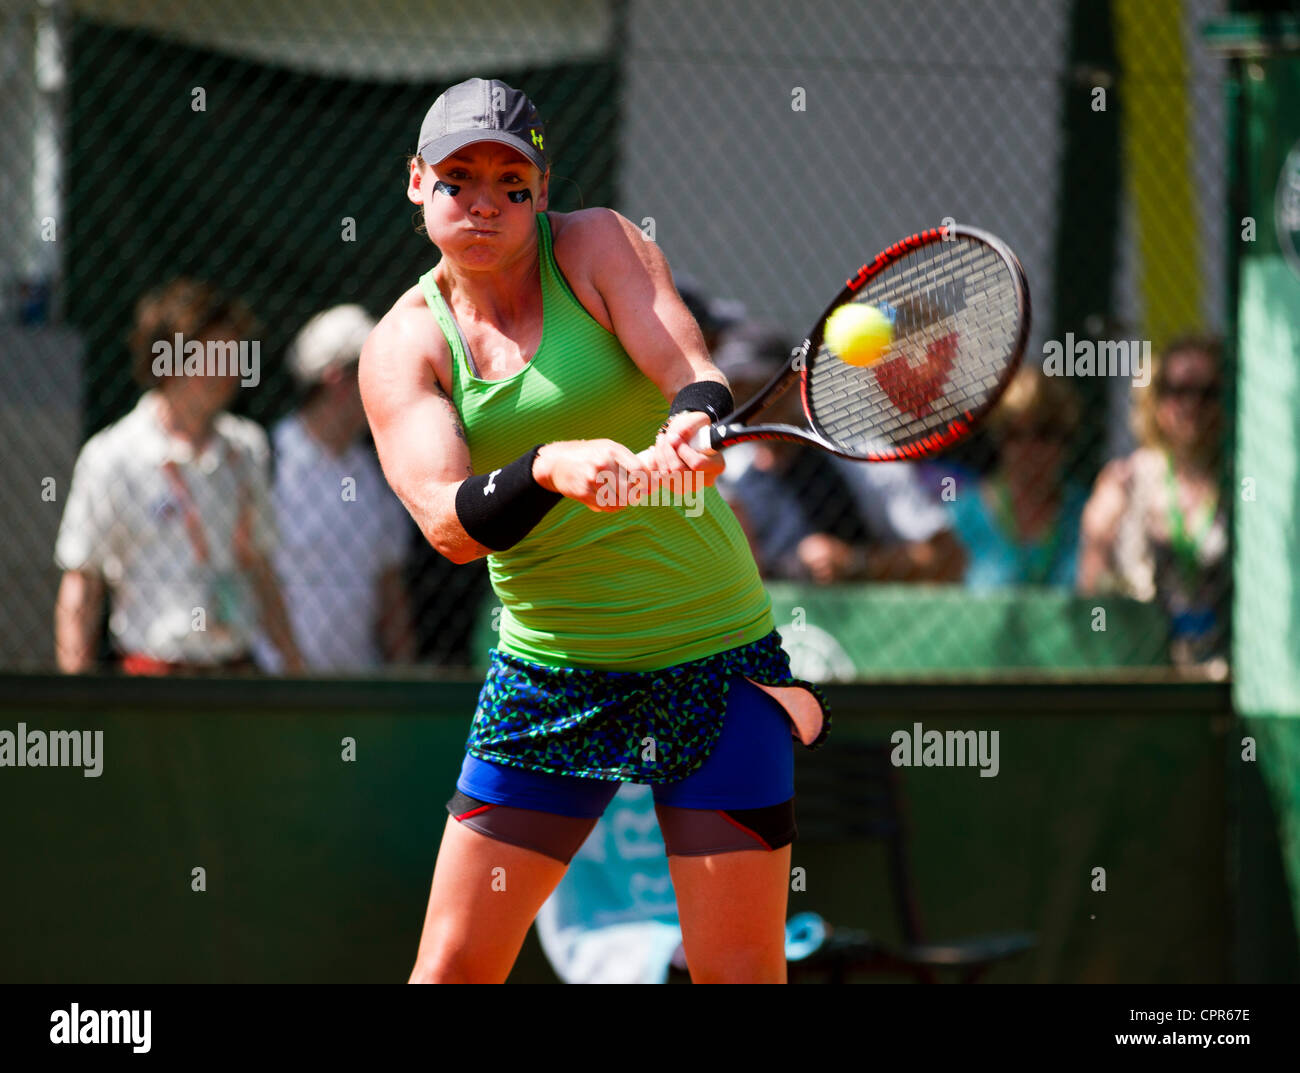 30.05.2012 Paris, France. Bethanie Mattek-Sands in action against Sloane Stephens on day 4 of the French Open Tennis from Roland Garros. Stock Photo